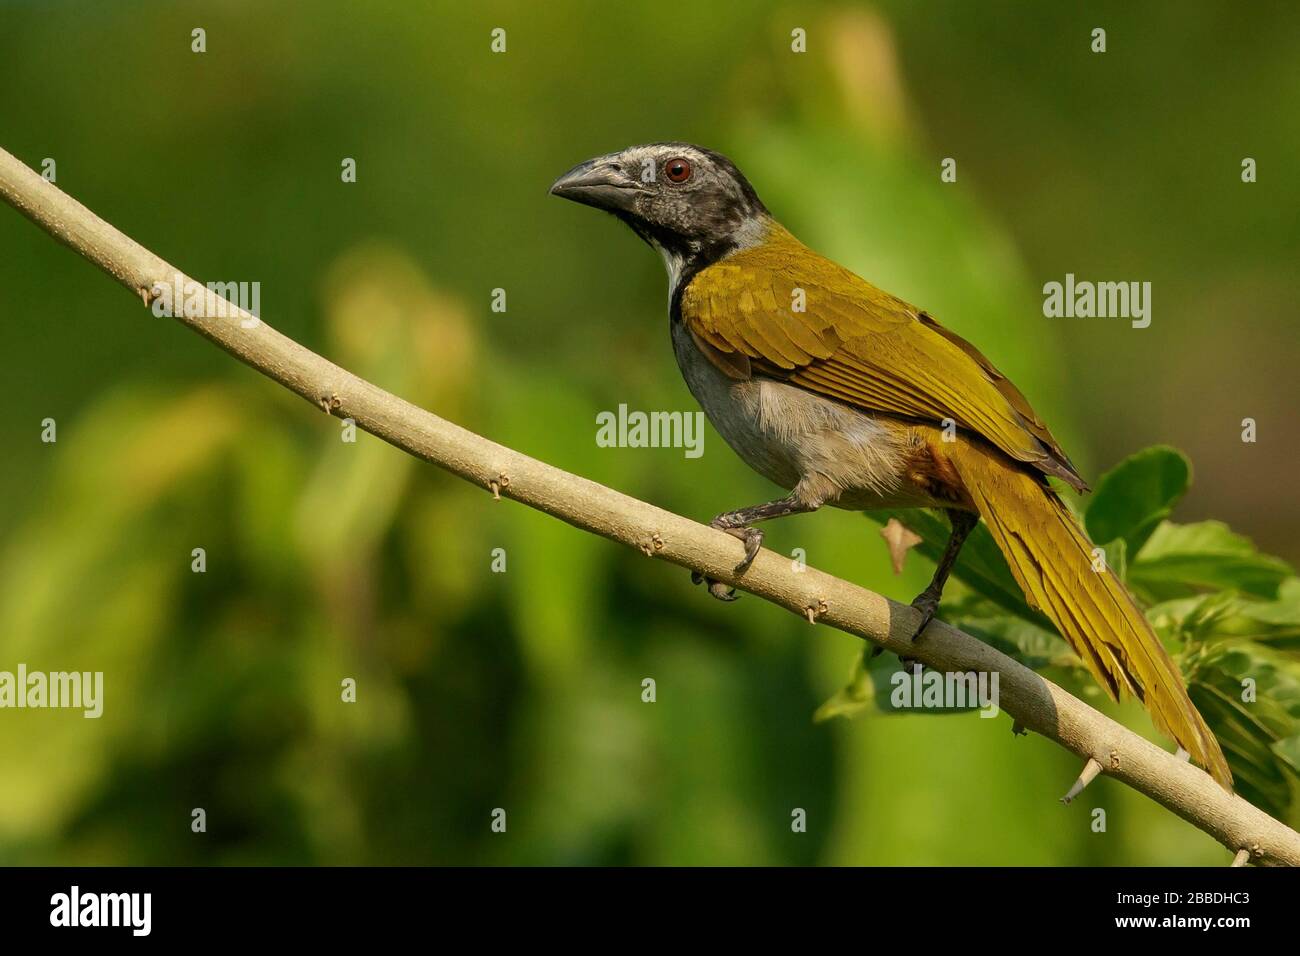 Black-headed Saltator (Saltator atriceps) perched on a branch in Guatemala in Central America. Stock Photo